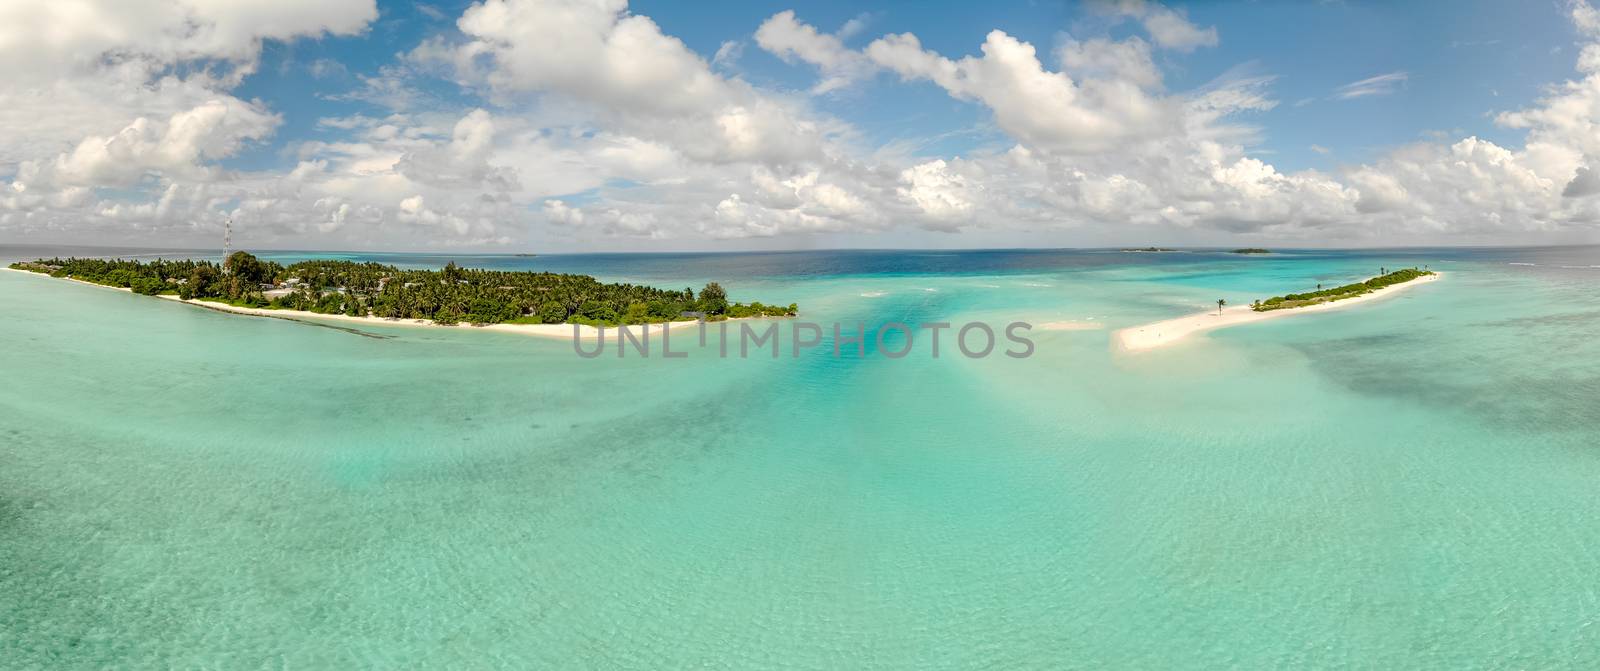 Picture perfect beach and turquoise lagoon on small tropical island on Maldives by kasto